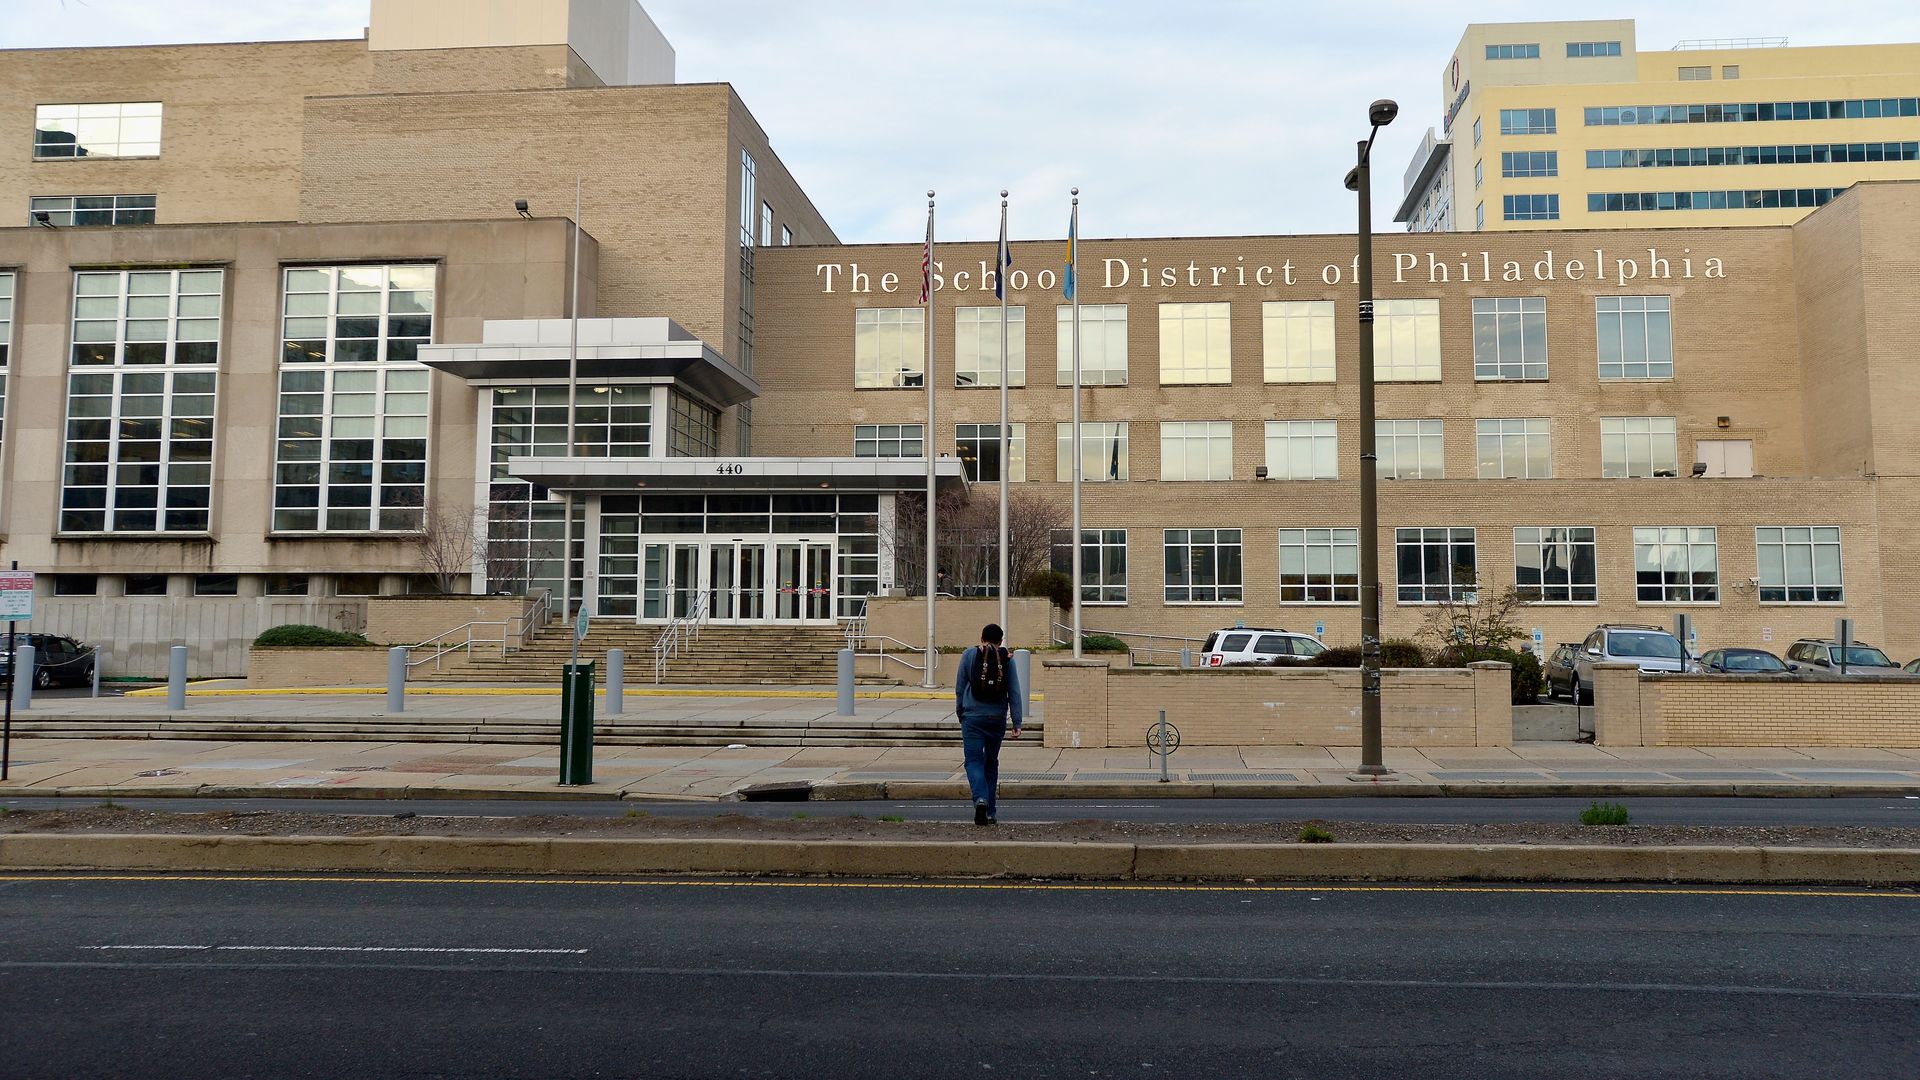 A general view of the School District of Philadelphia offices. Photo: Paul Marotta/Getty Images